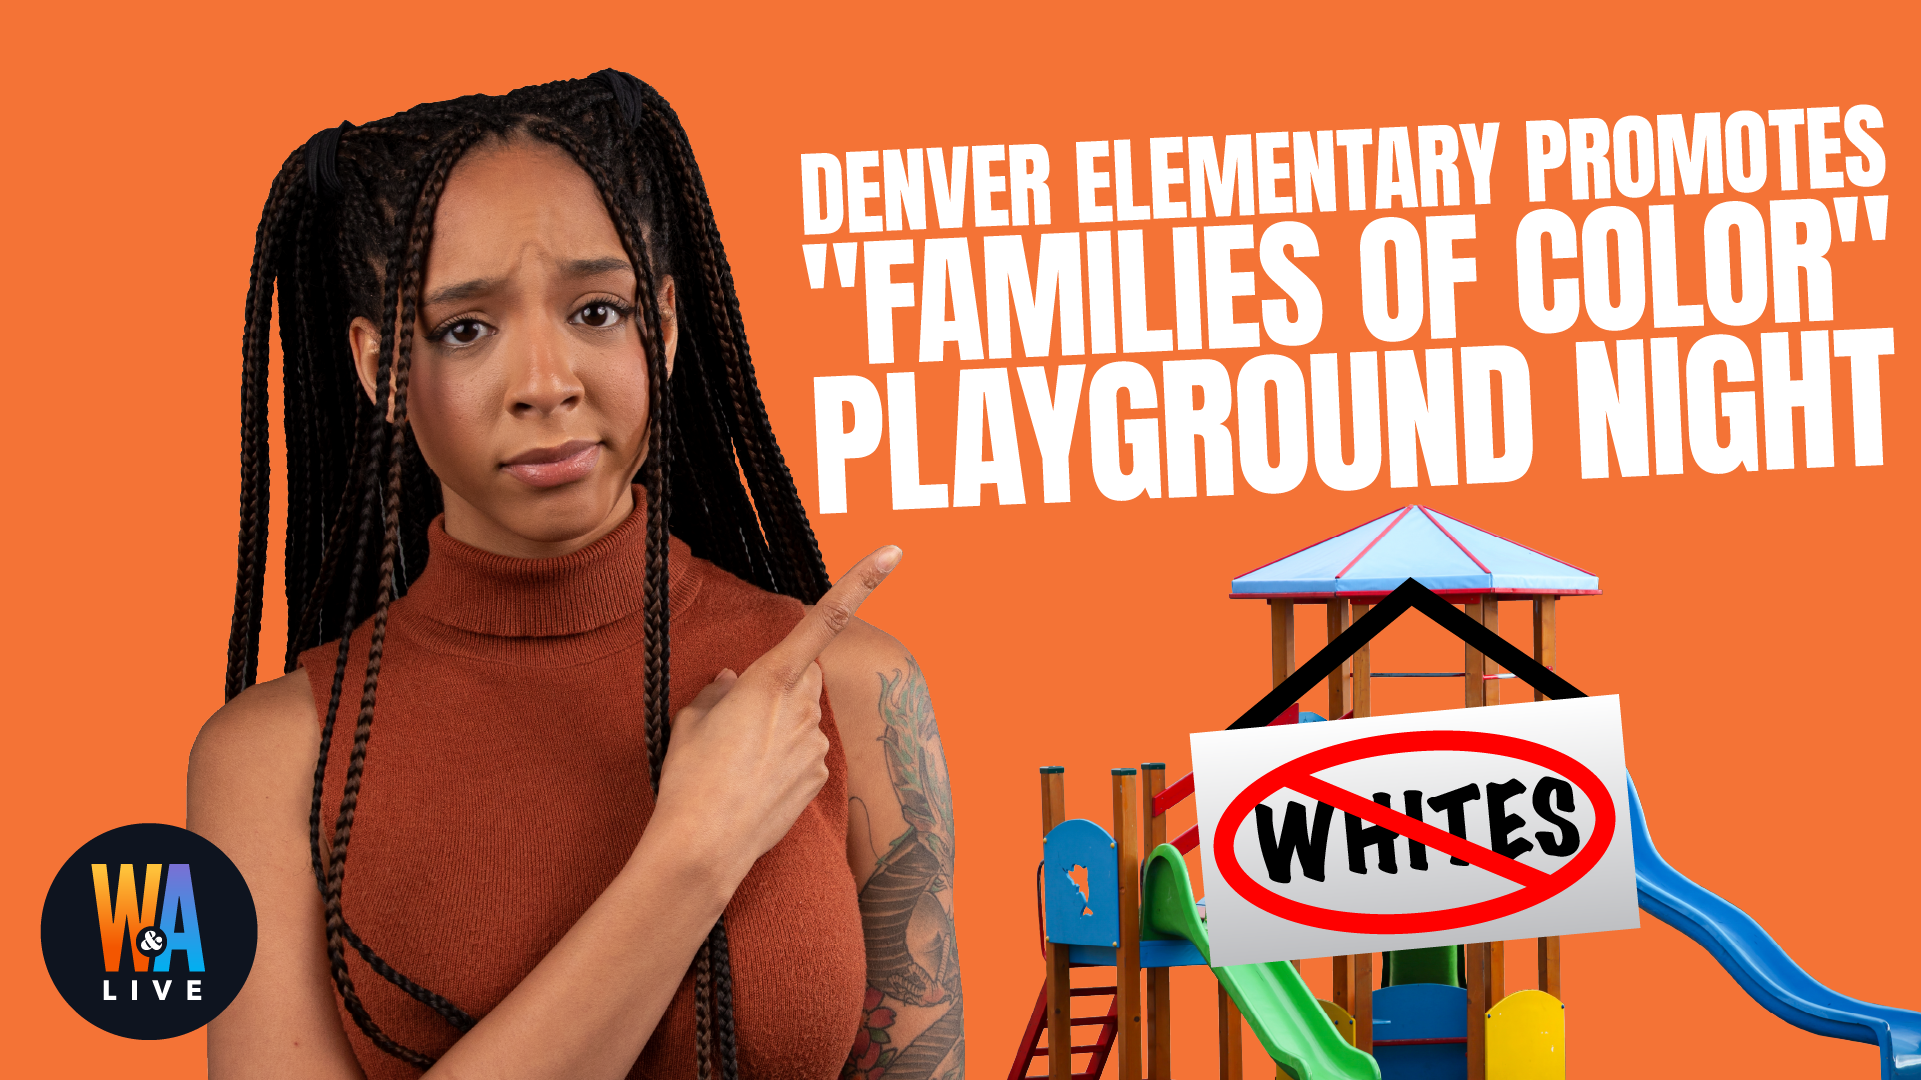 THIS IS WRONG: Elementary School Promotes Racially-Segregated Playtime